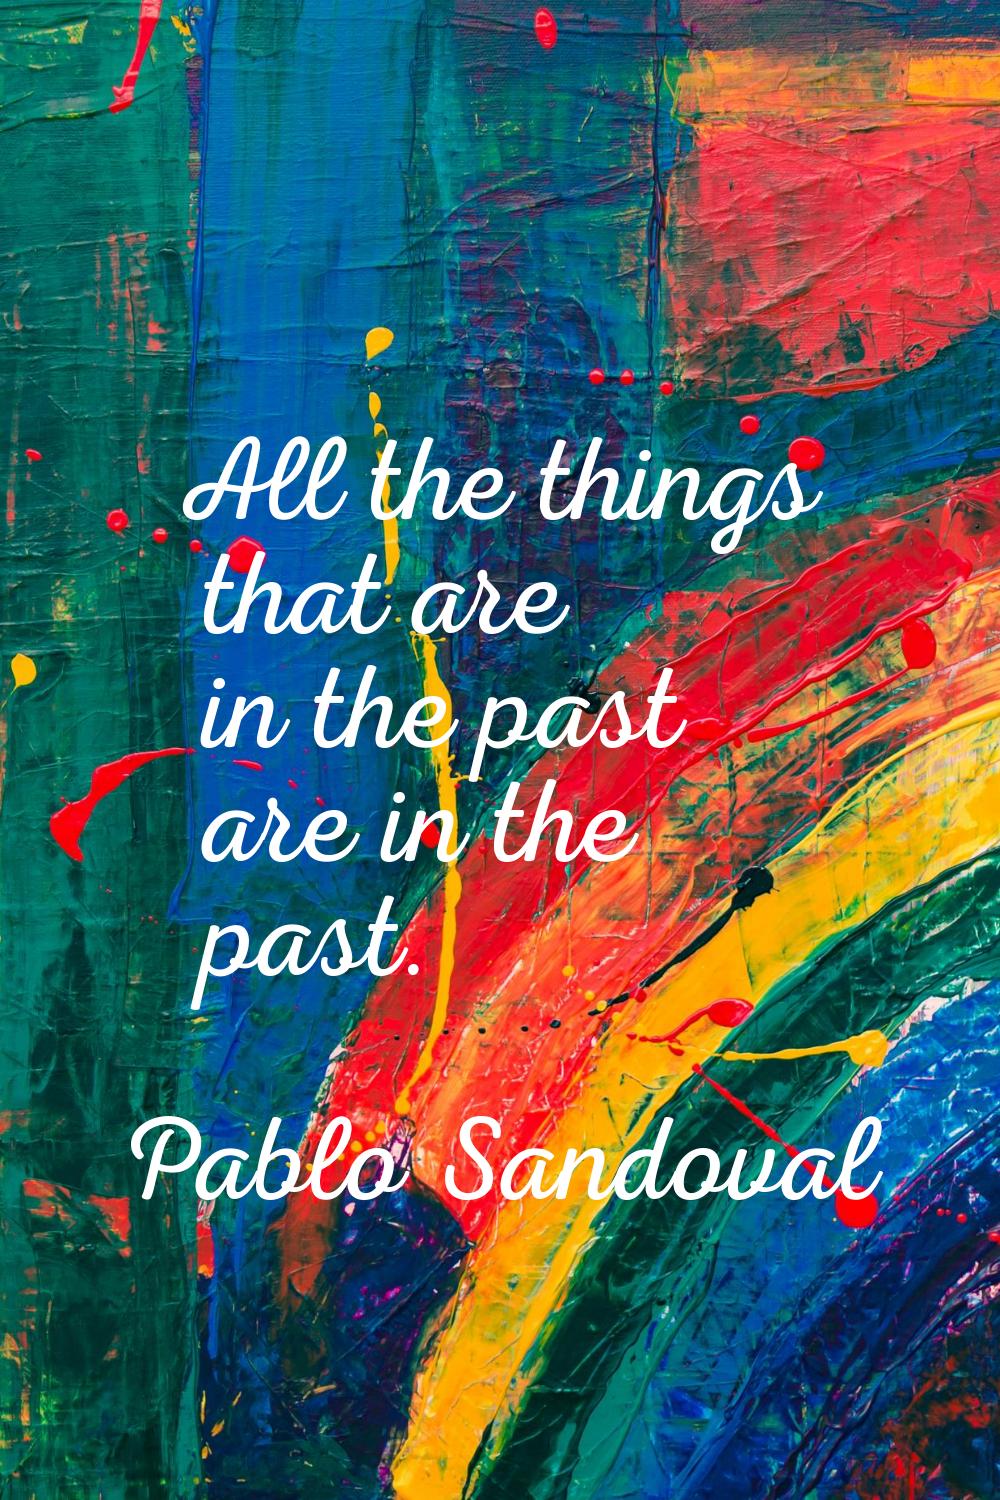 All the things that are in the past are in the past.